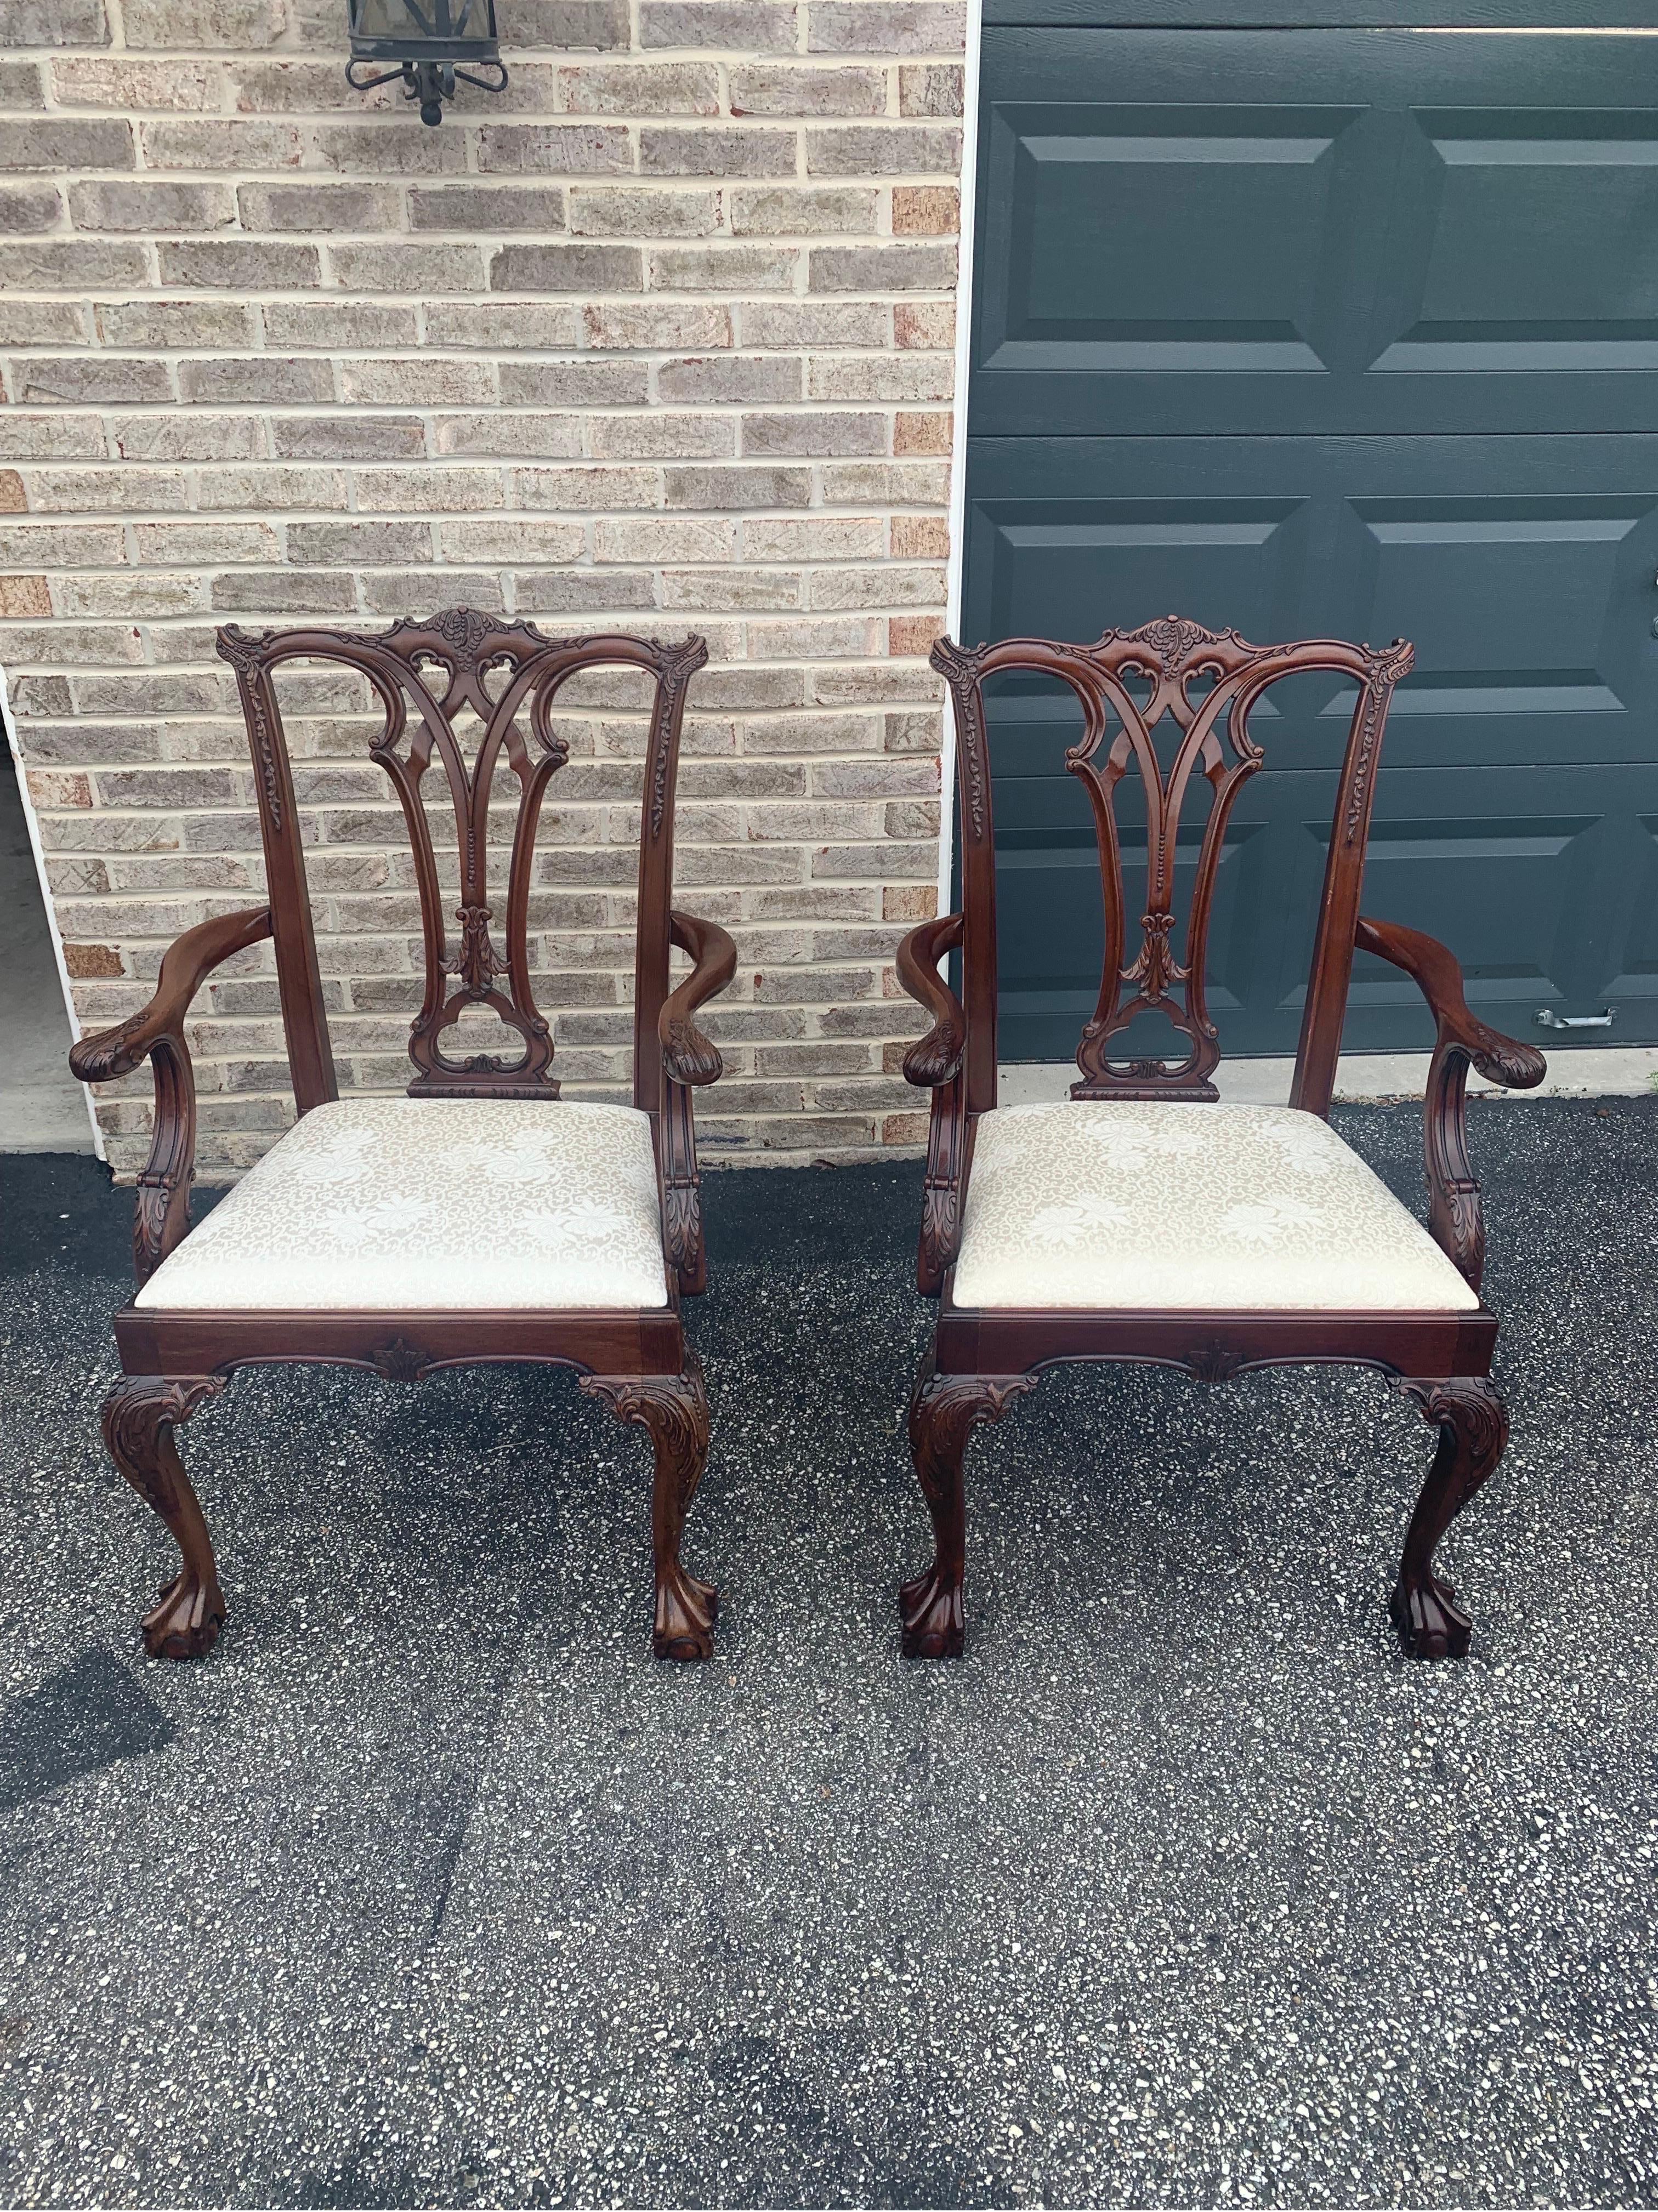 Set of 10 Mahogany Chippendale Dining Chairs Ball in Claw- 2 arm chairs and 8 side chairs included. These chairs were purchased from Paramount Antiques in NYC - there is a gold plate under each chair. Otherwise the manufacturer is unknown.

These